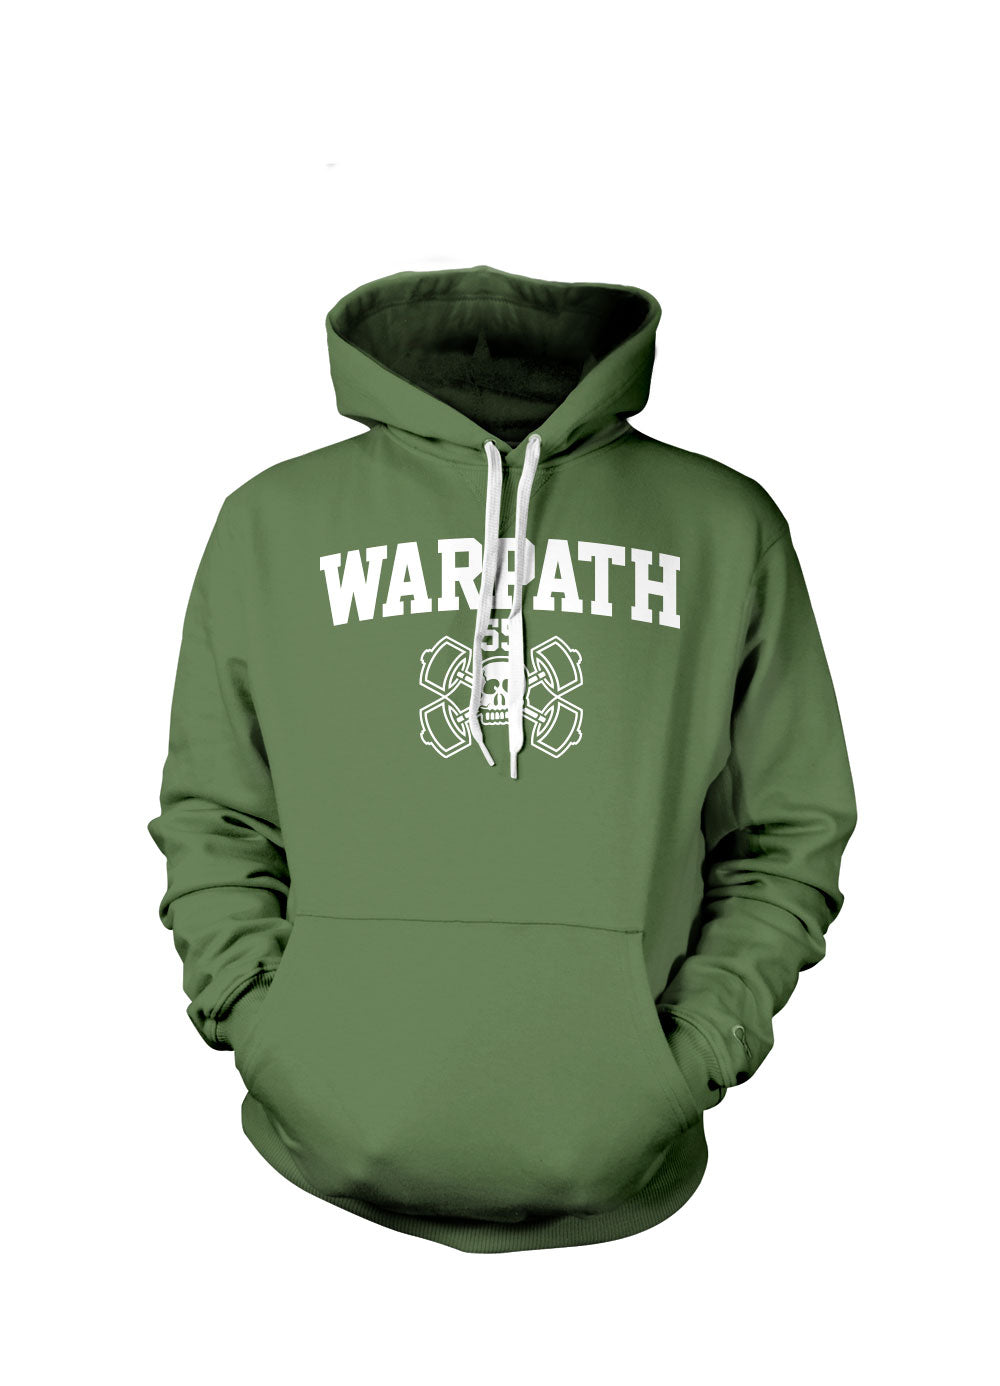 Warpath Fitness Apparel hoodie. The best fitness apparel in the industry. For those that embrace the adverse lifestyle and never shy away.